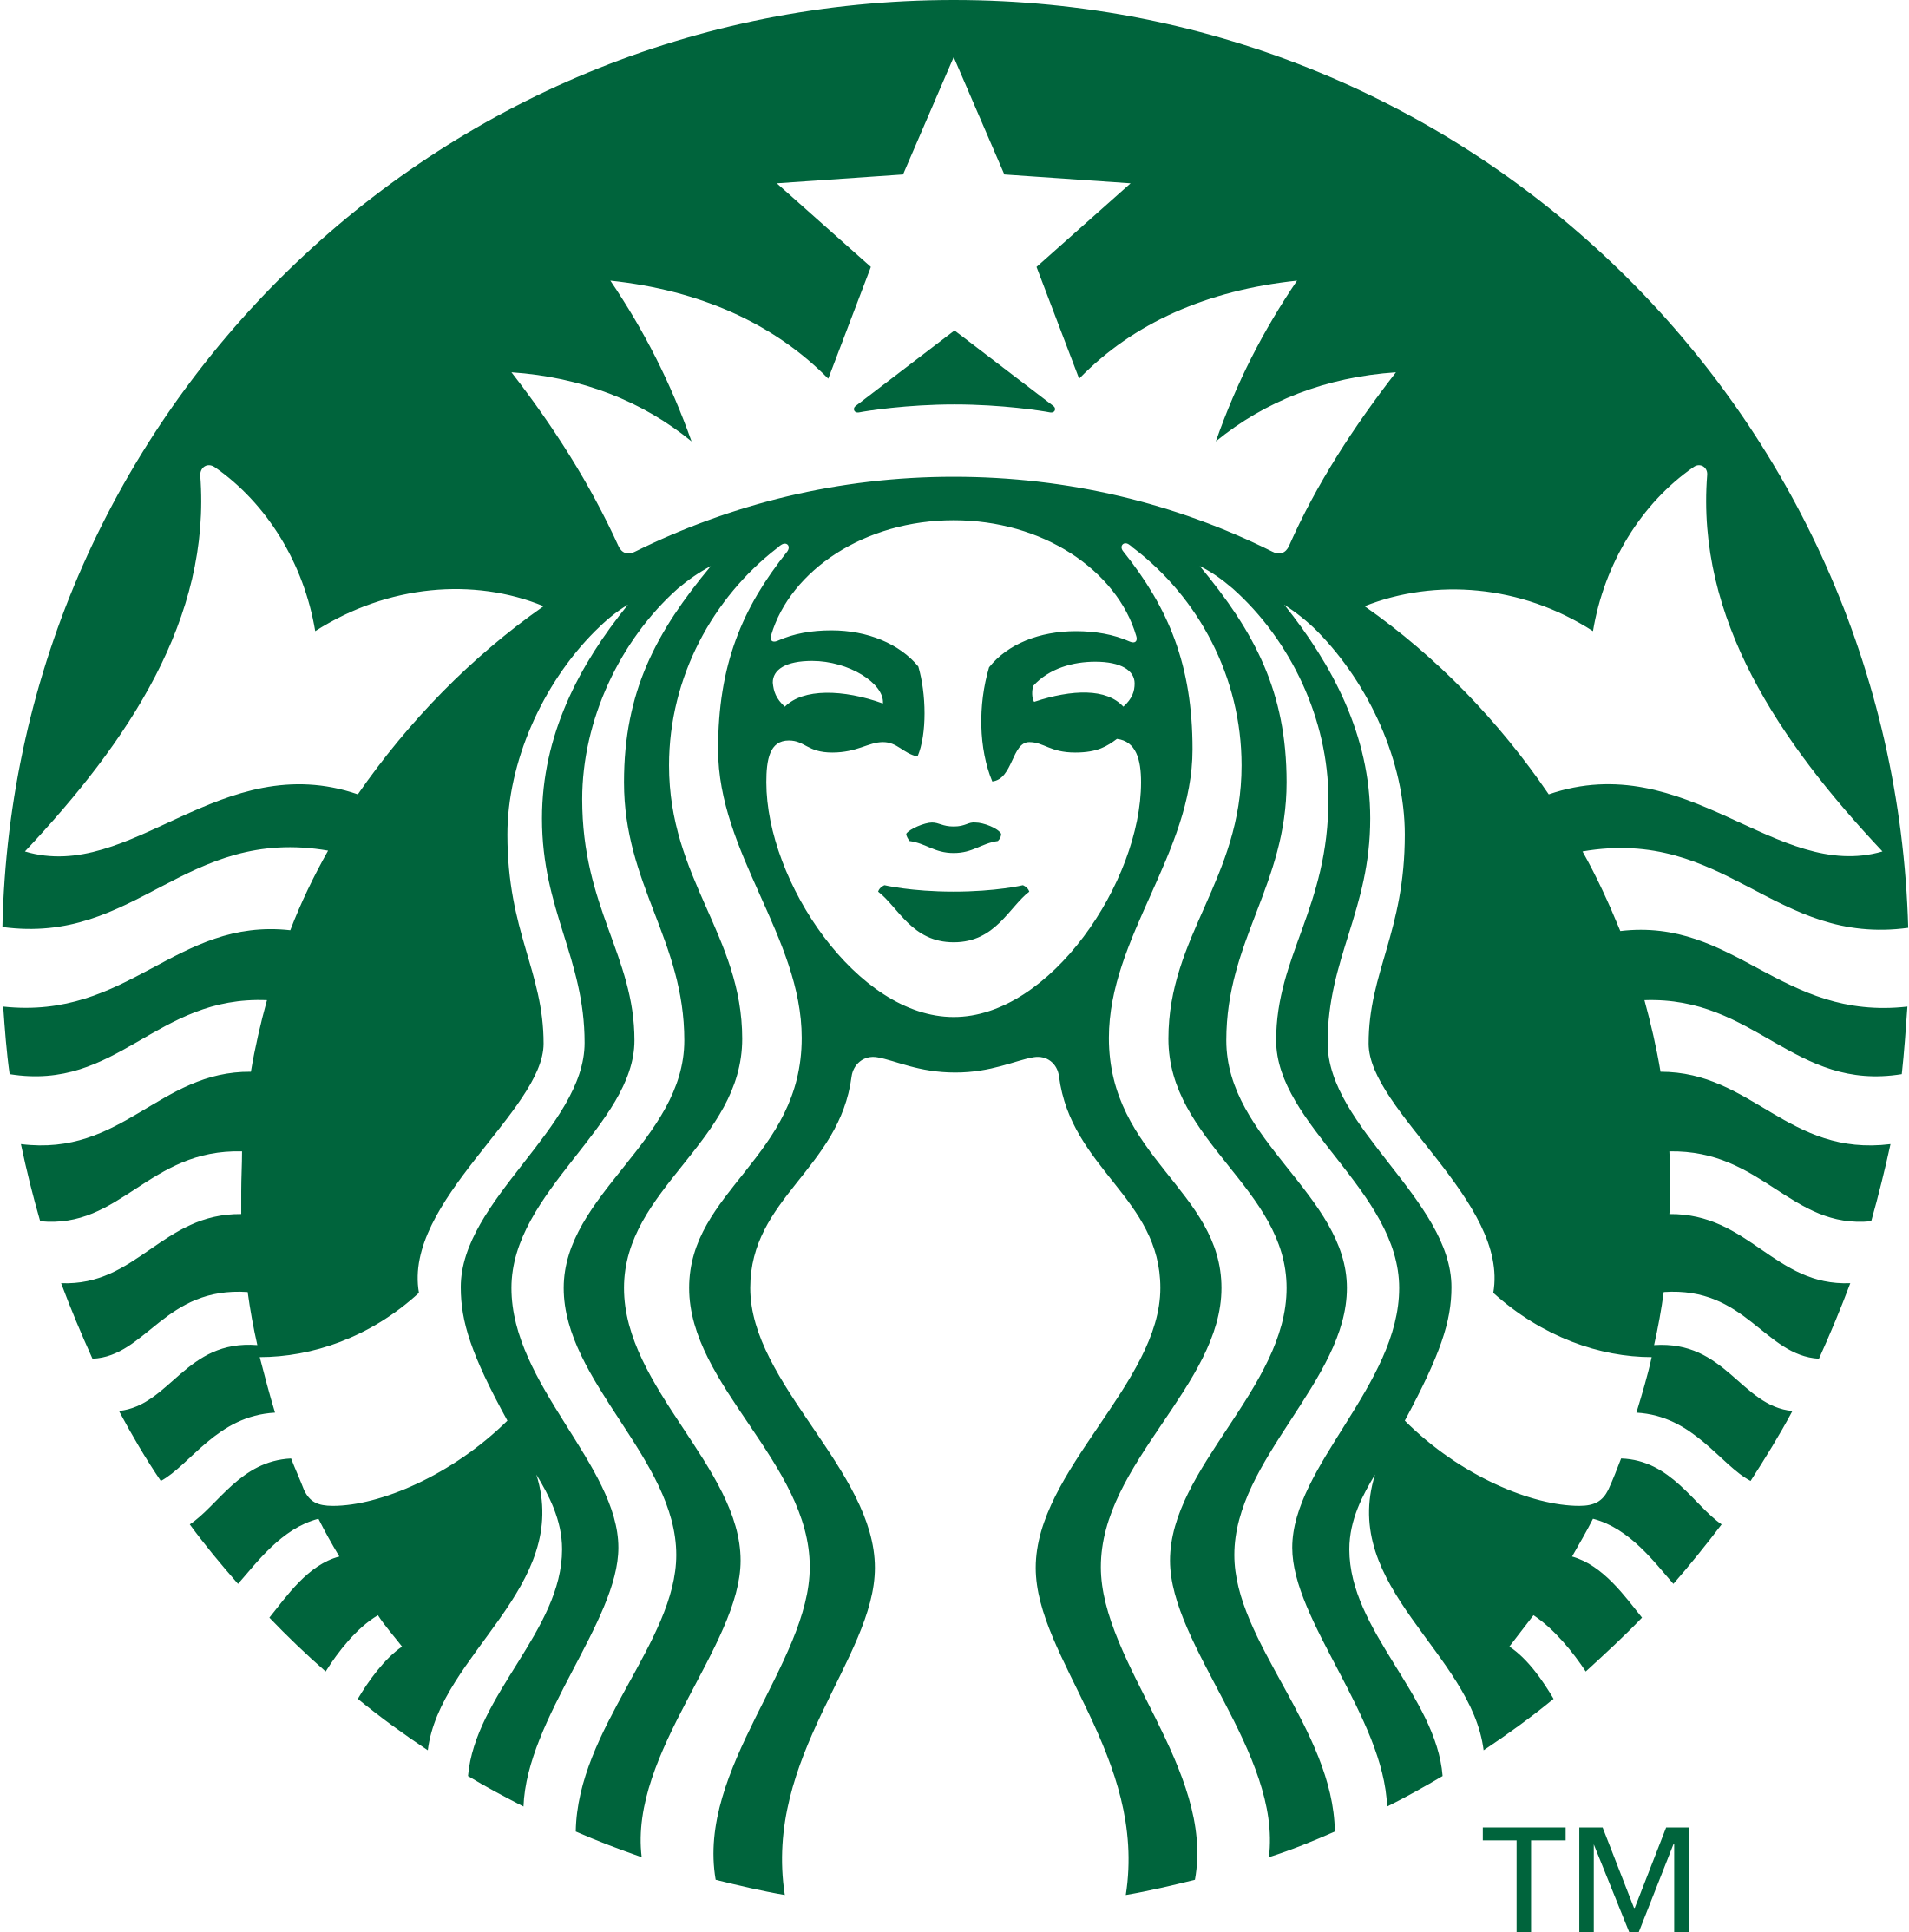 Starbuck logo - A mermaid with a green background.